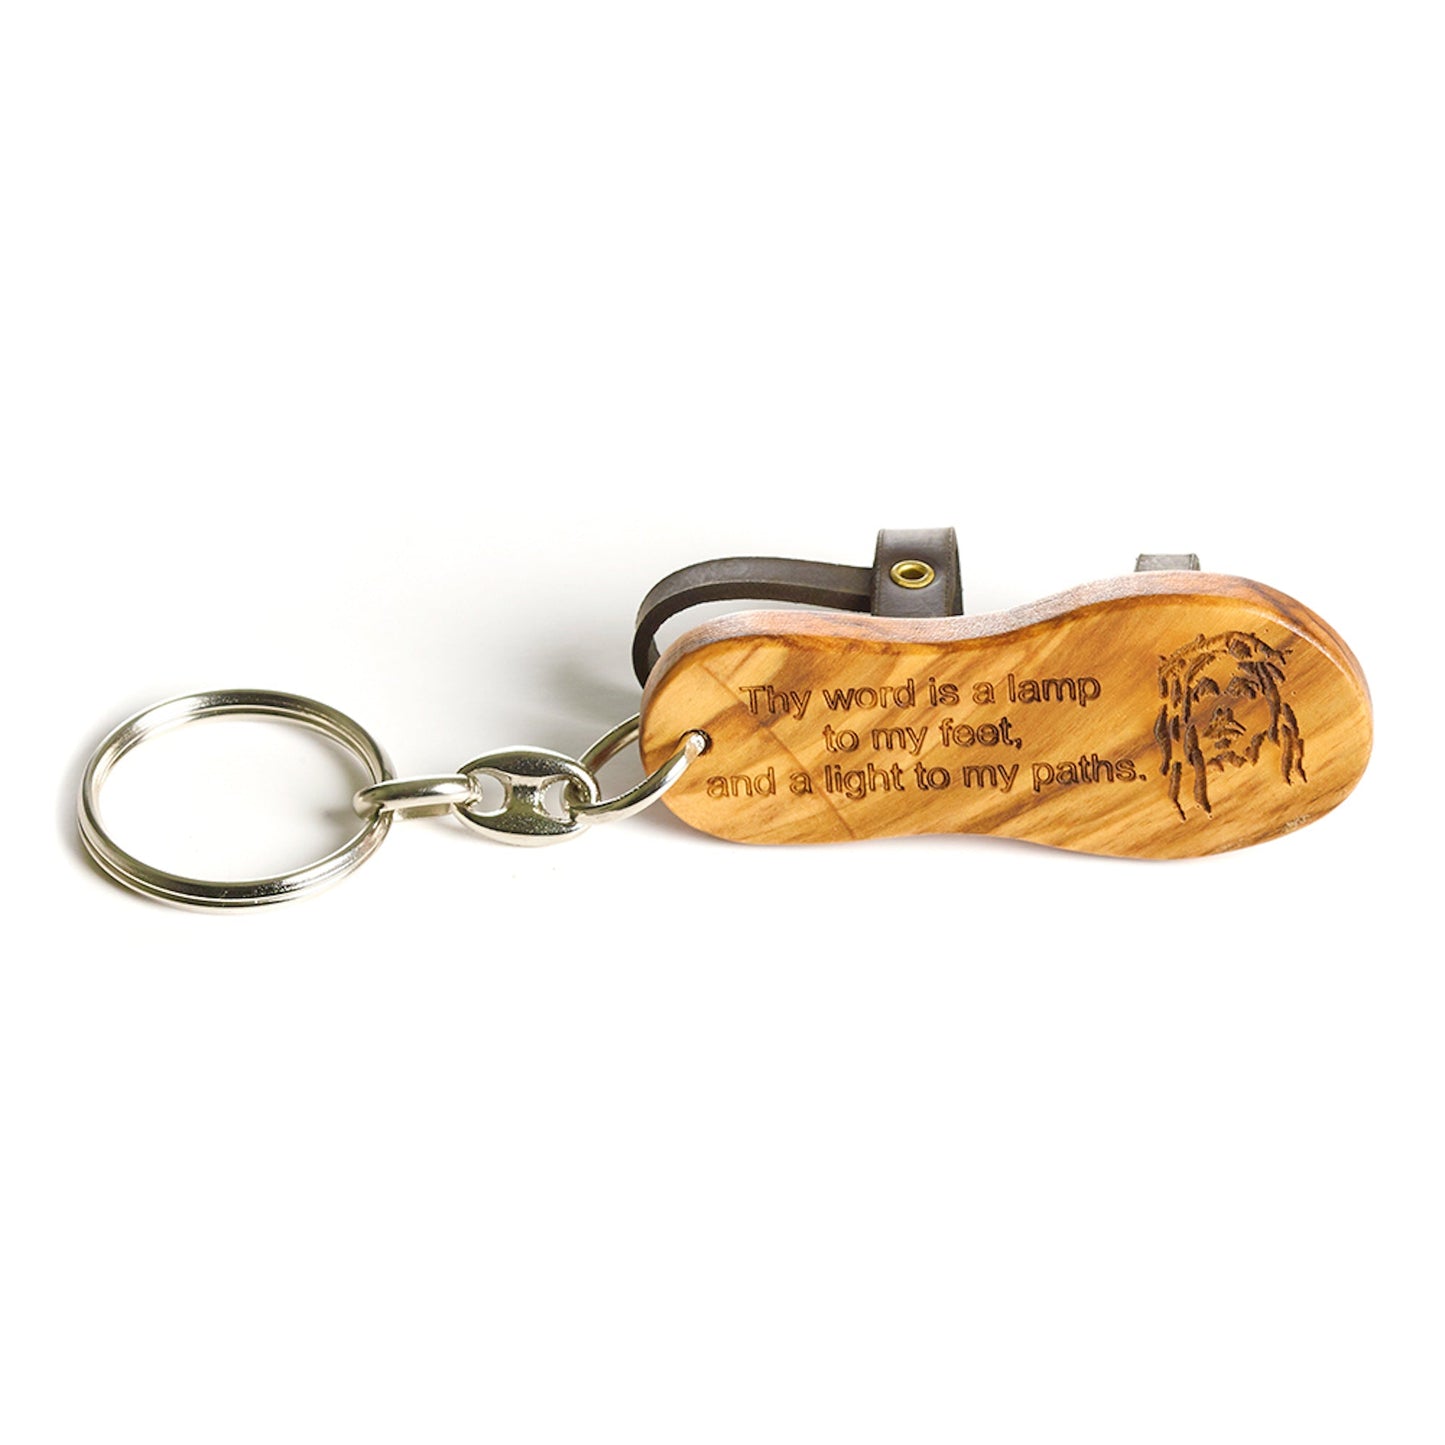 Wooden sandal keychain with leather straps, engraved with Psalm 119:105, symbolizing the pilgrimage of life.